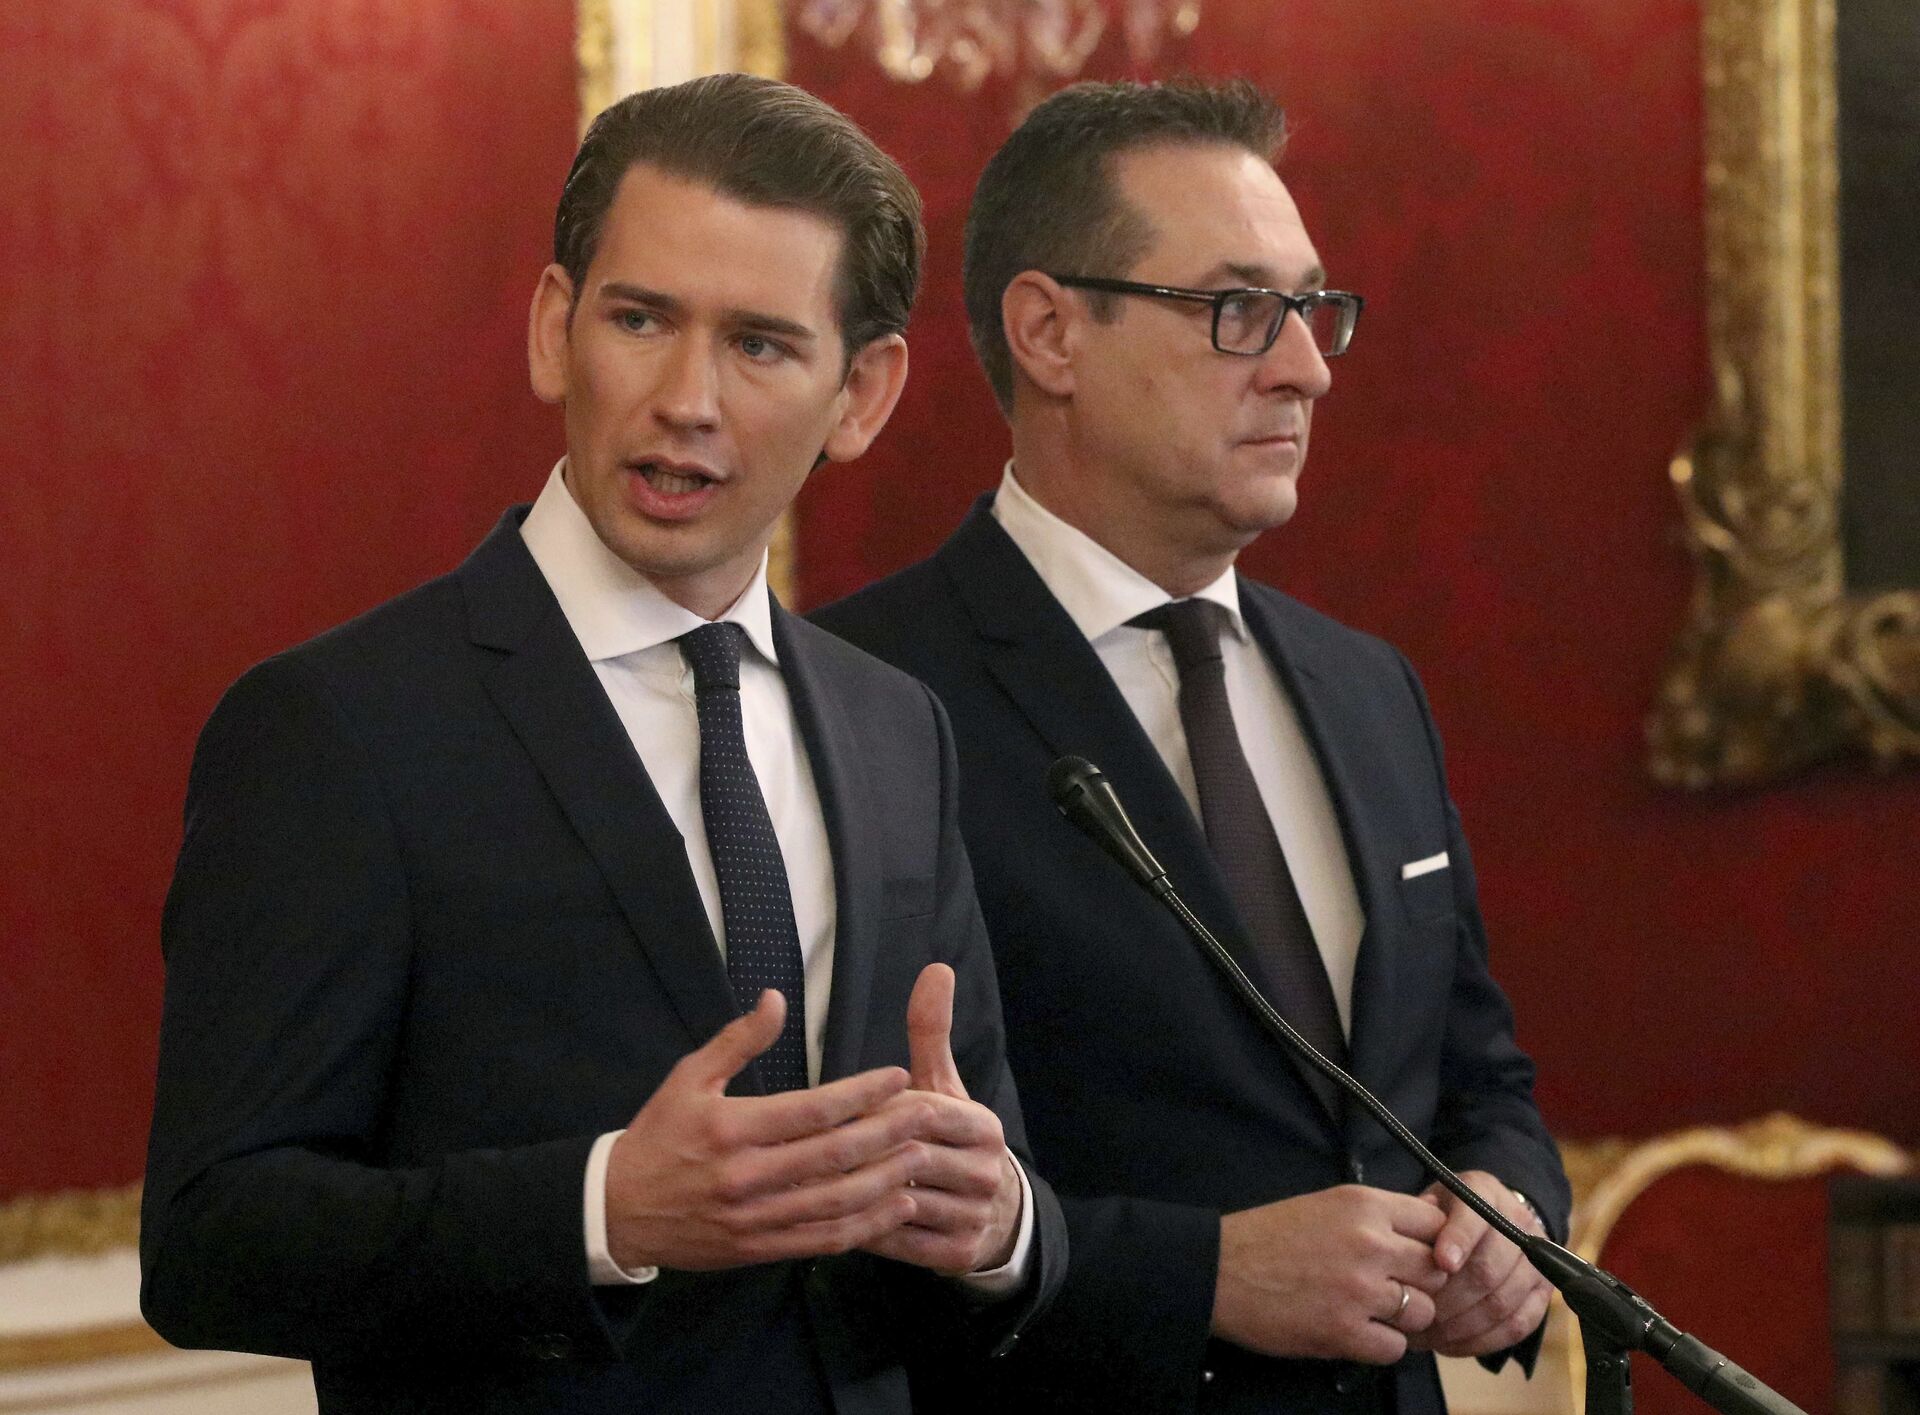 Foreign Minister and leader of the Austrian People's Party, OEVP, Sebastian Kurz, left, and Heinz-Christian Strache, chairman of the right-wing Freedom Party, FPOE, talk to press after talks with Austrian President Alexander van der Bellen at the Hofburg palace in Vienna, Austria, Saturday, Dec. 16, 2017 - Sputnik International, 1920, 02.12.2021